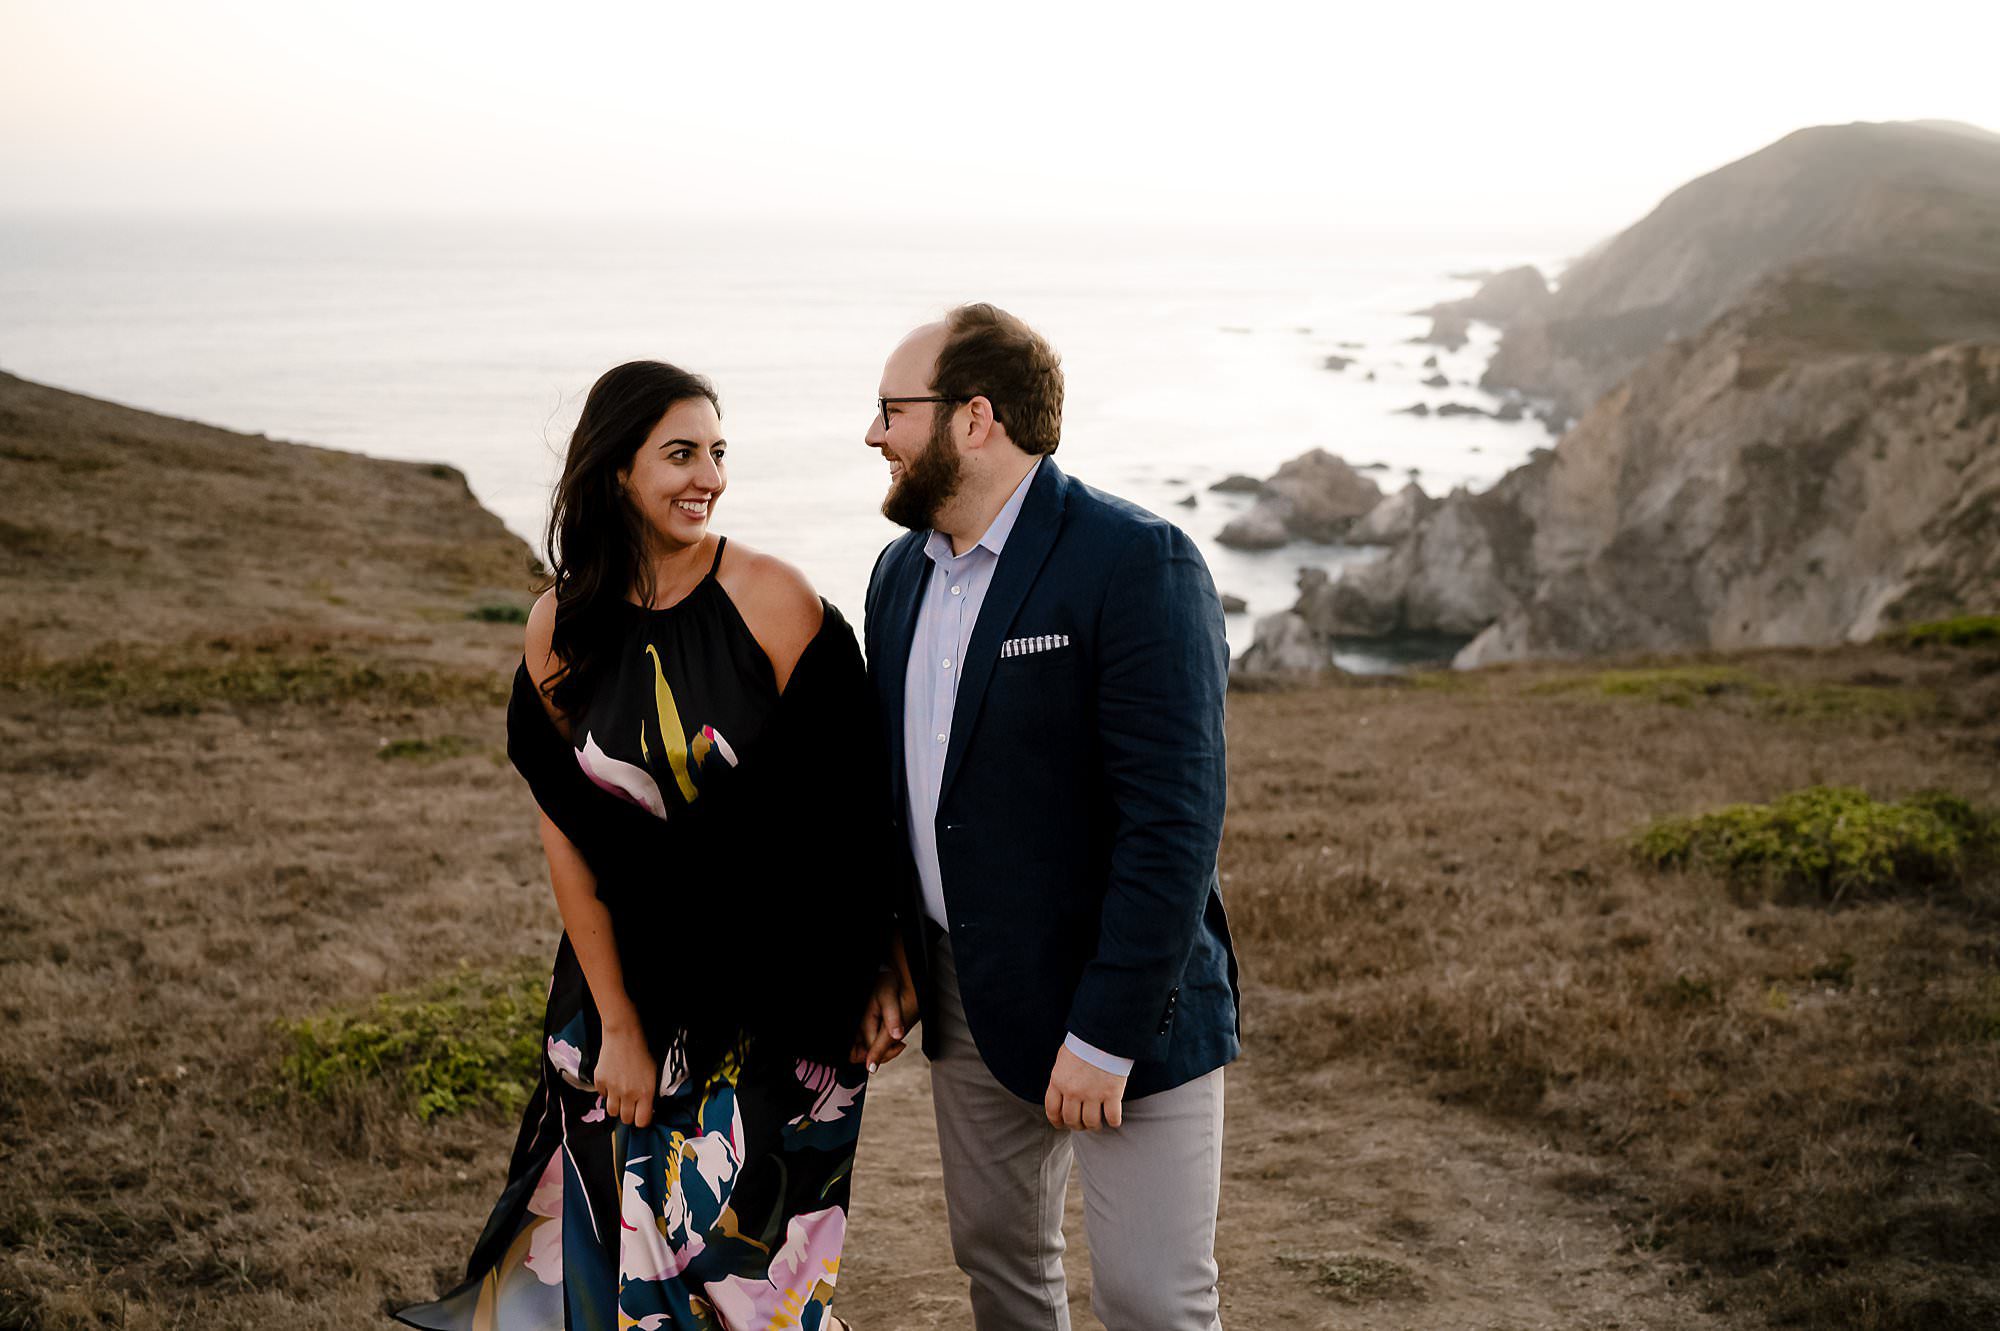 Engaged couple walking along the cliff side on a sunset hike to Chimney Rock in Pt Reyes